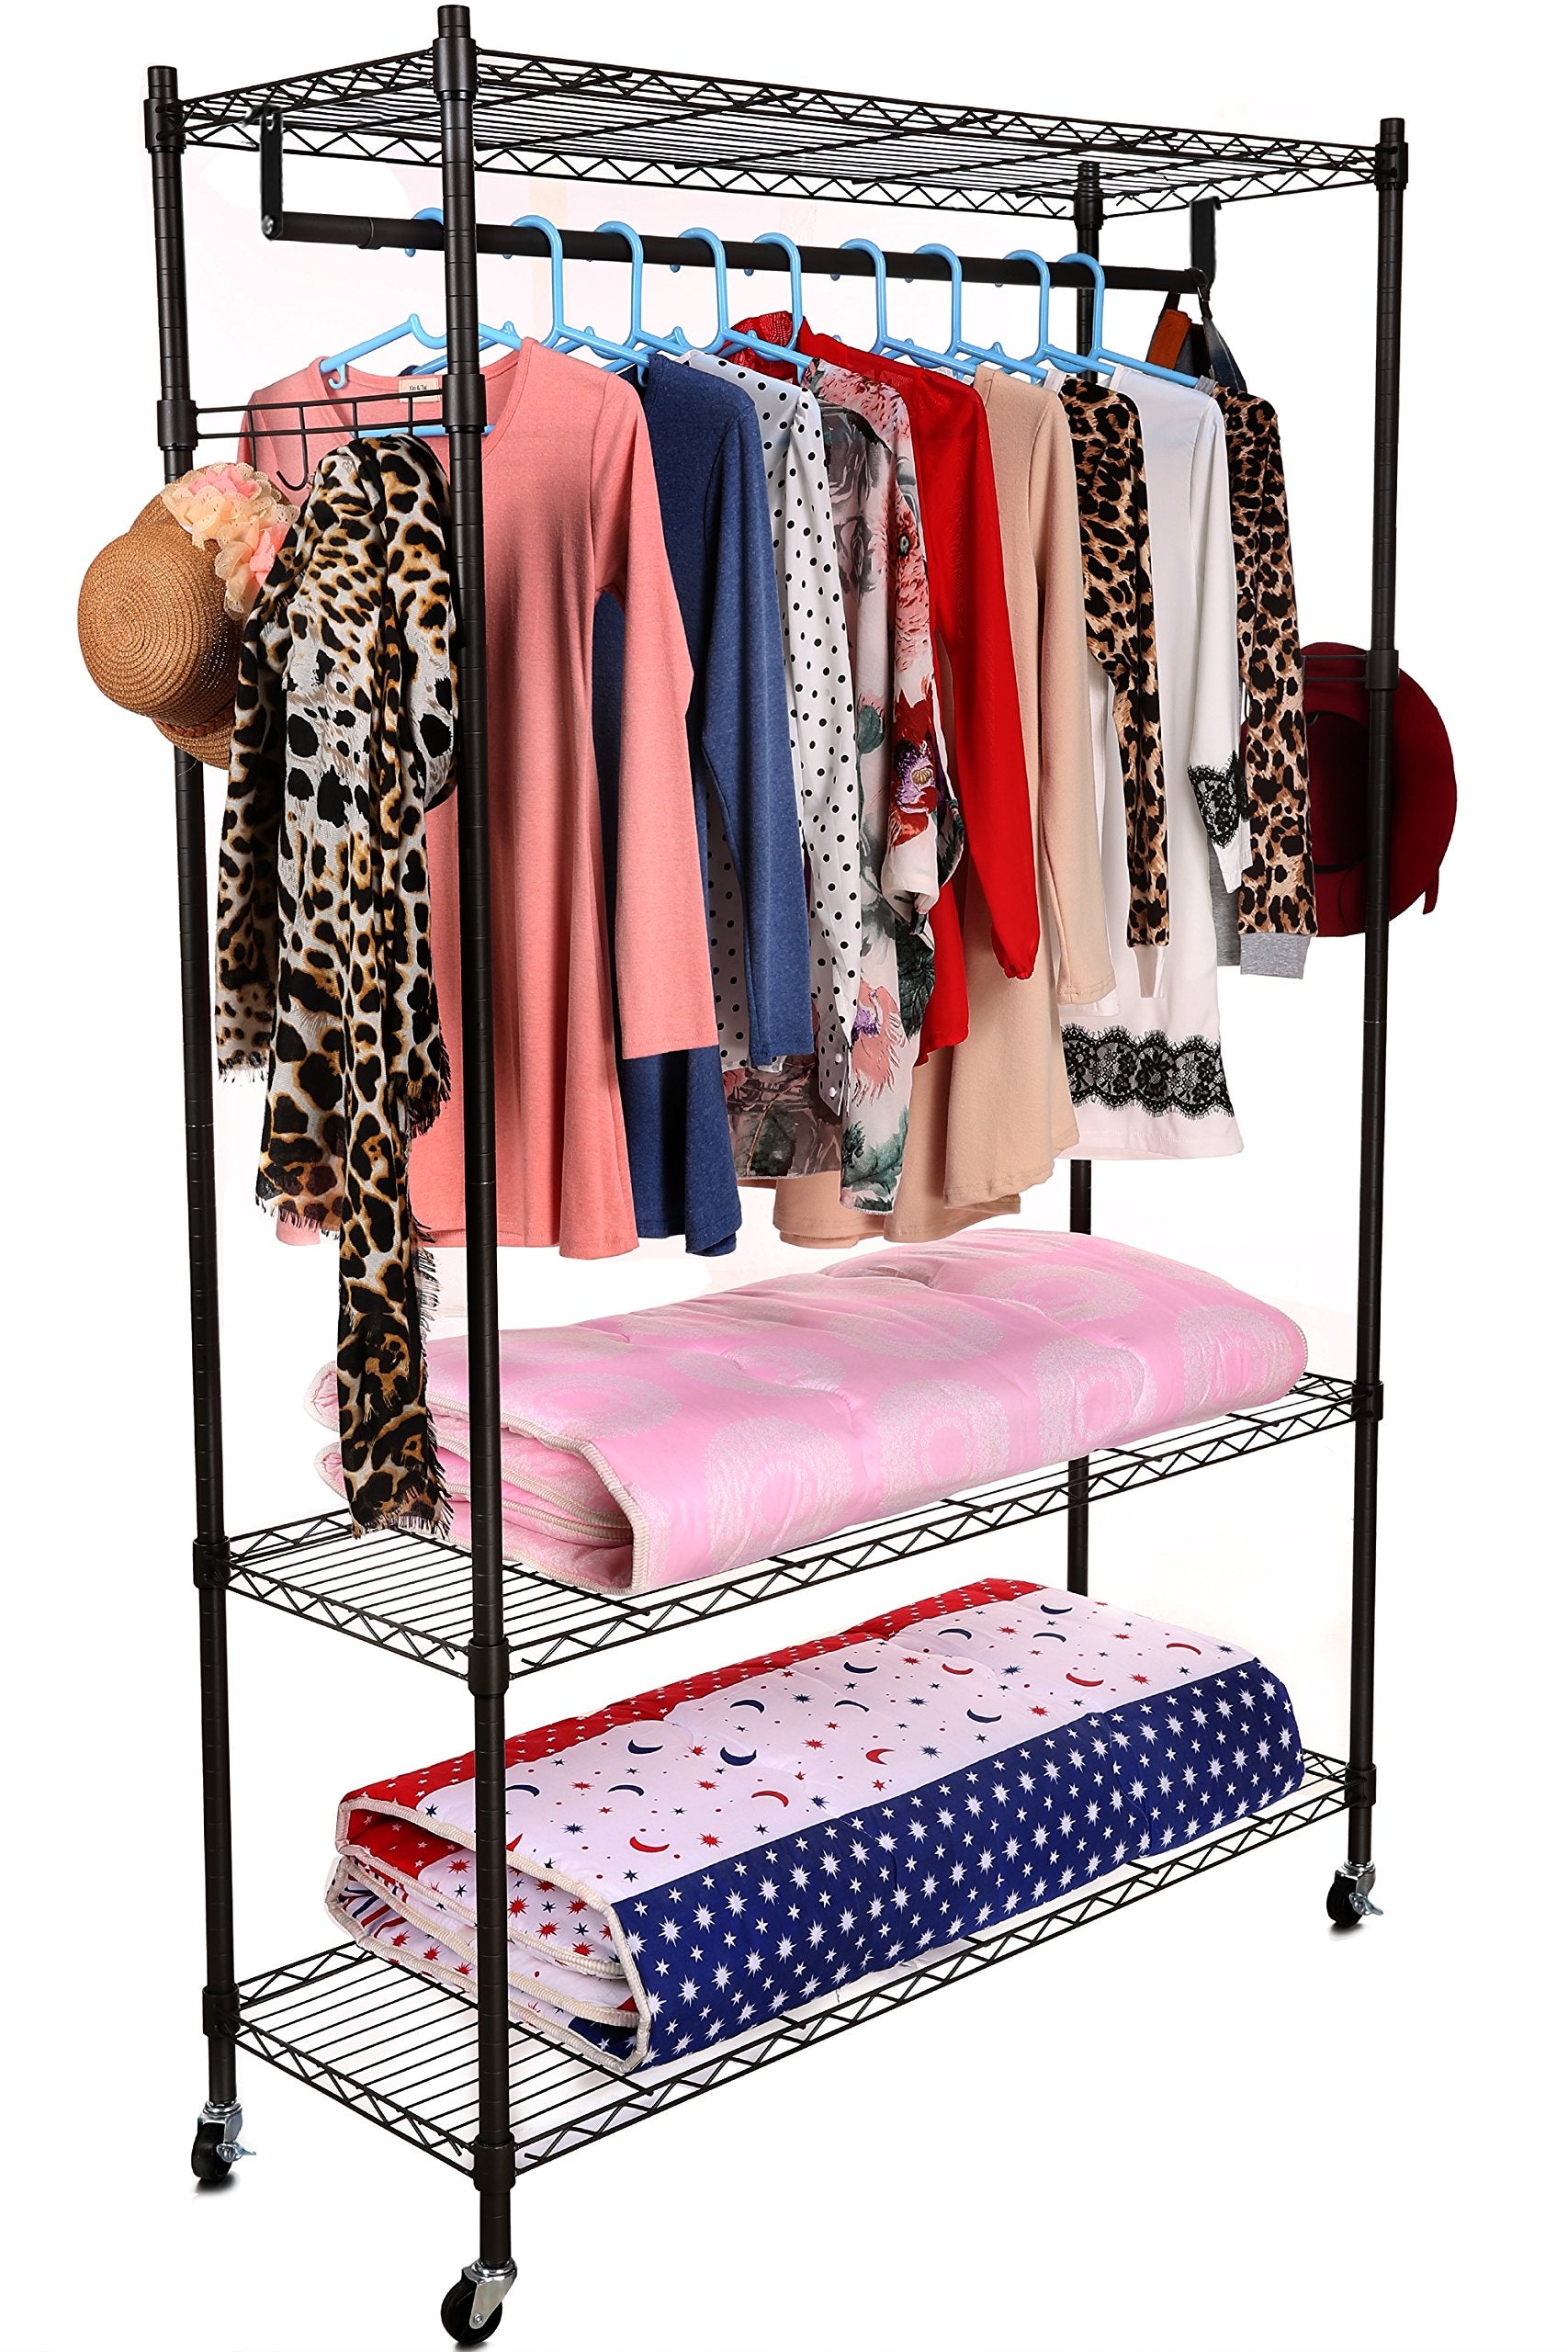 Unho Heavy Duty Rolling Closet Clothes Rail - OR2019125G for sale